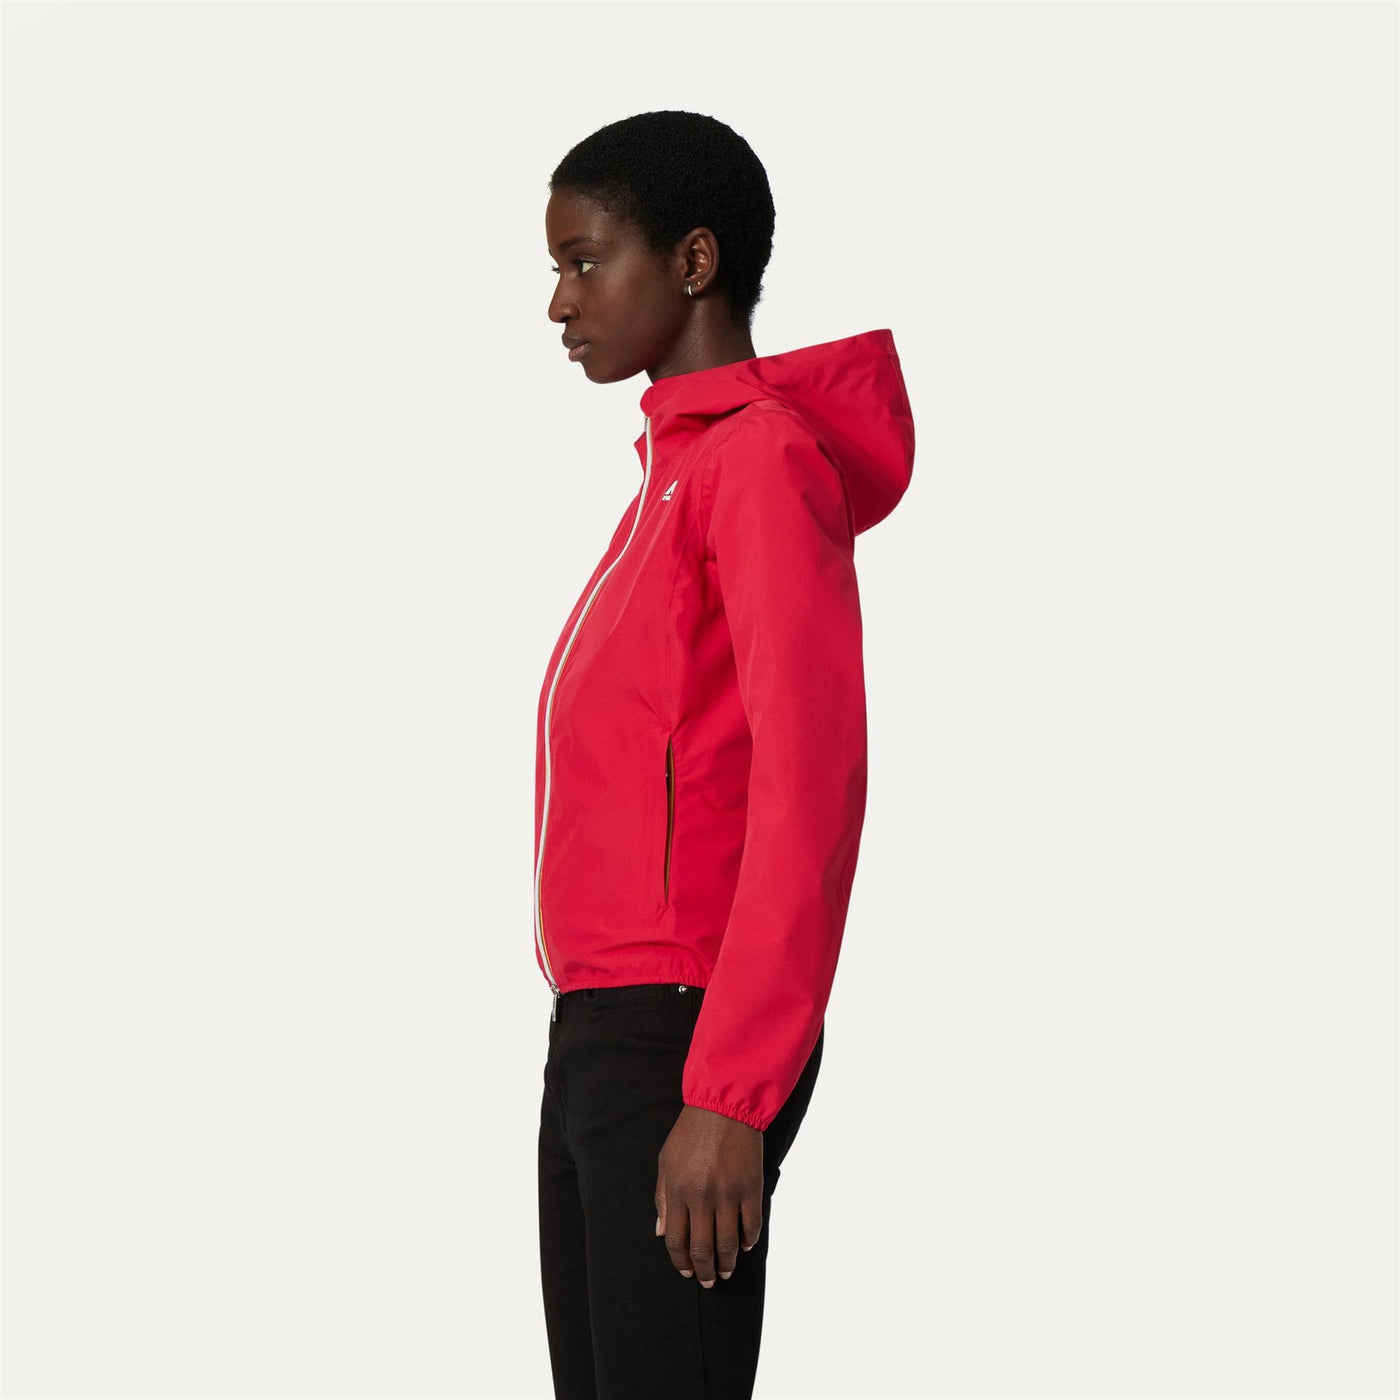 LIL STRETCH DOT - Jackets - Short - Woman - RED BERRY